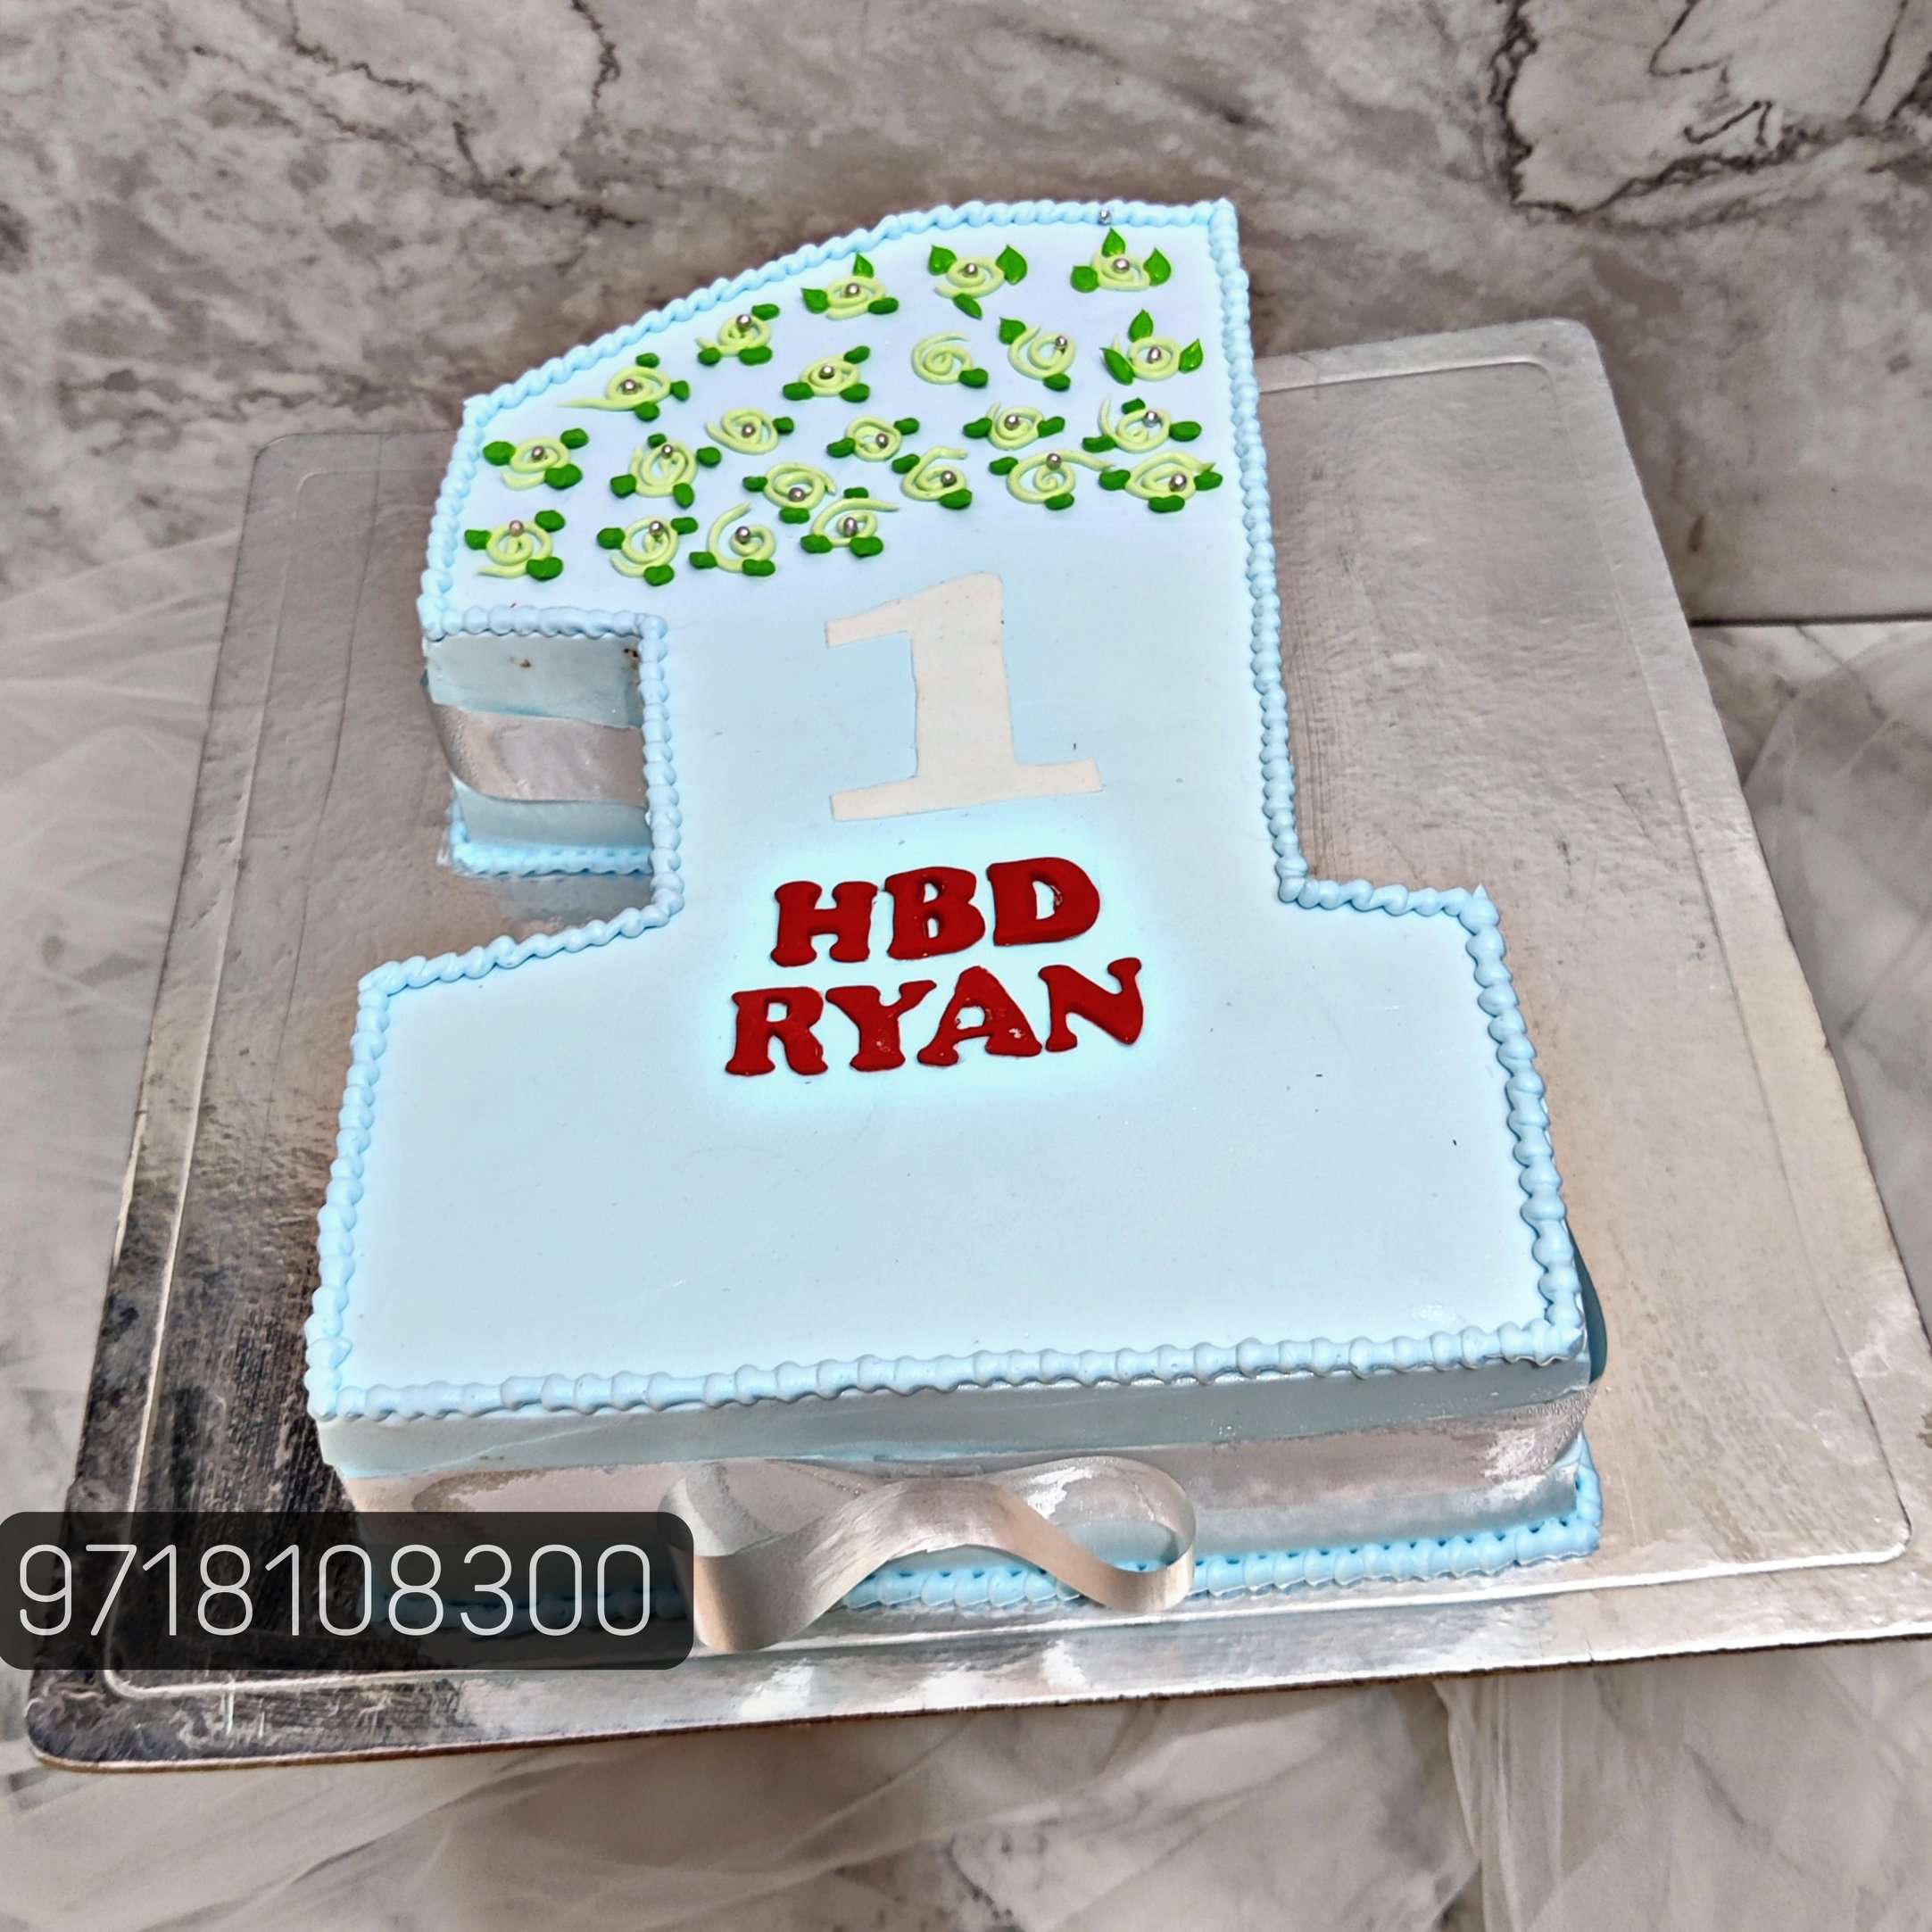 Best cake ovens for top quality cakes at home | - Times of India-sgquangbinhtourist.com.vn